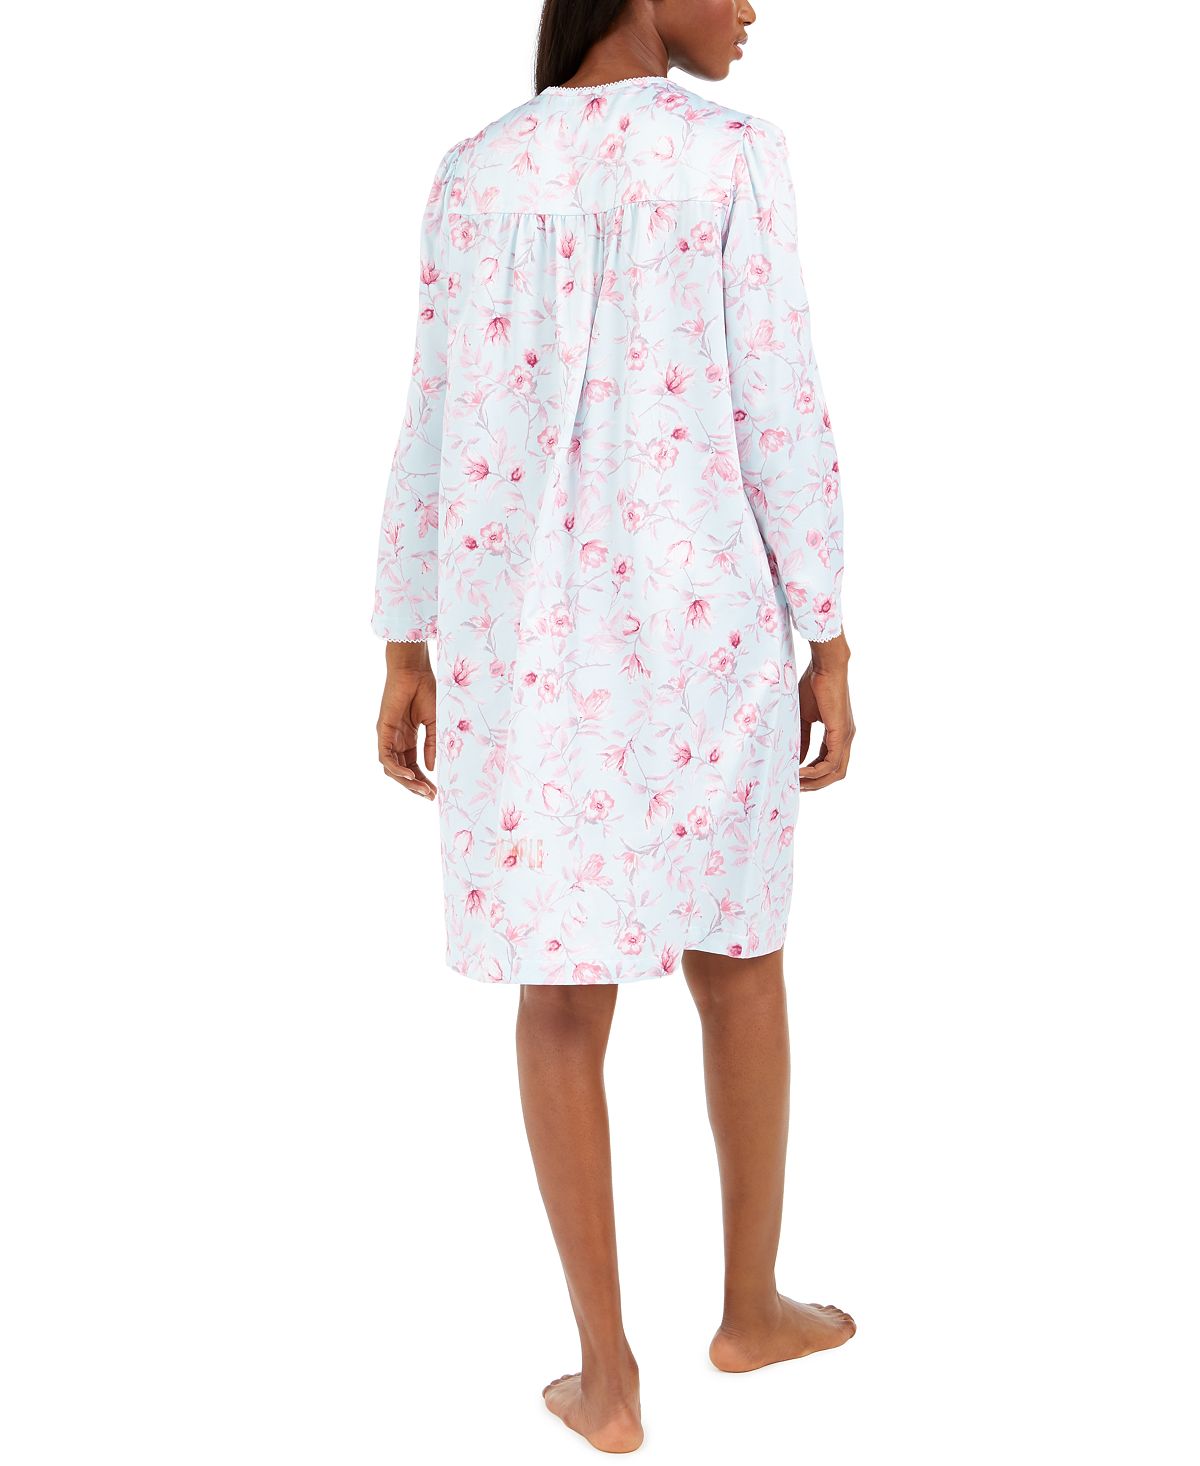 Miss Elaine Wo Brushed Back Floral-print Satin Nightgown Pink Floral Stems On Aqua